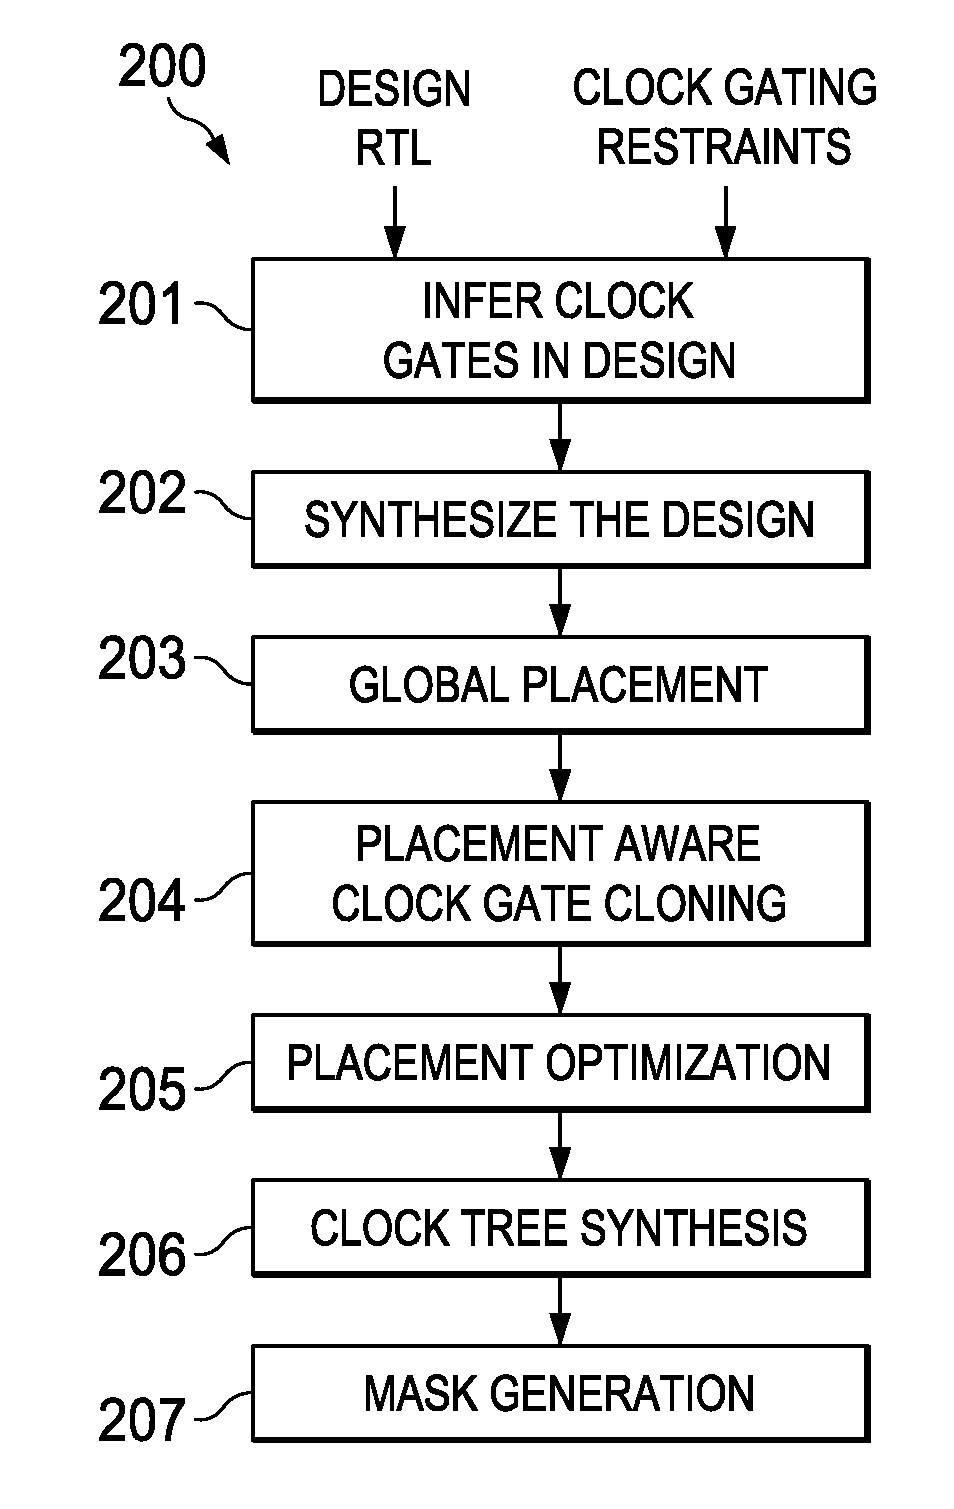 Placement aware clock gate cloning and fanout optimization